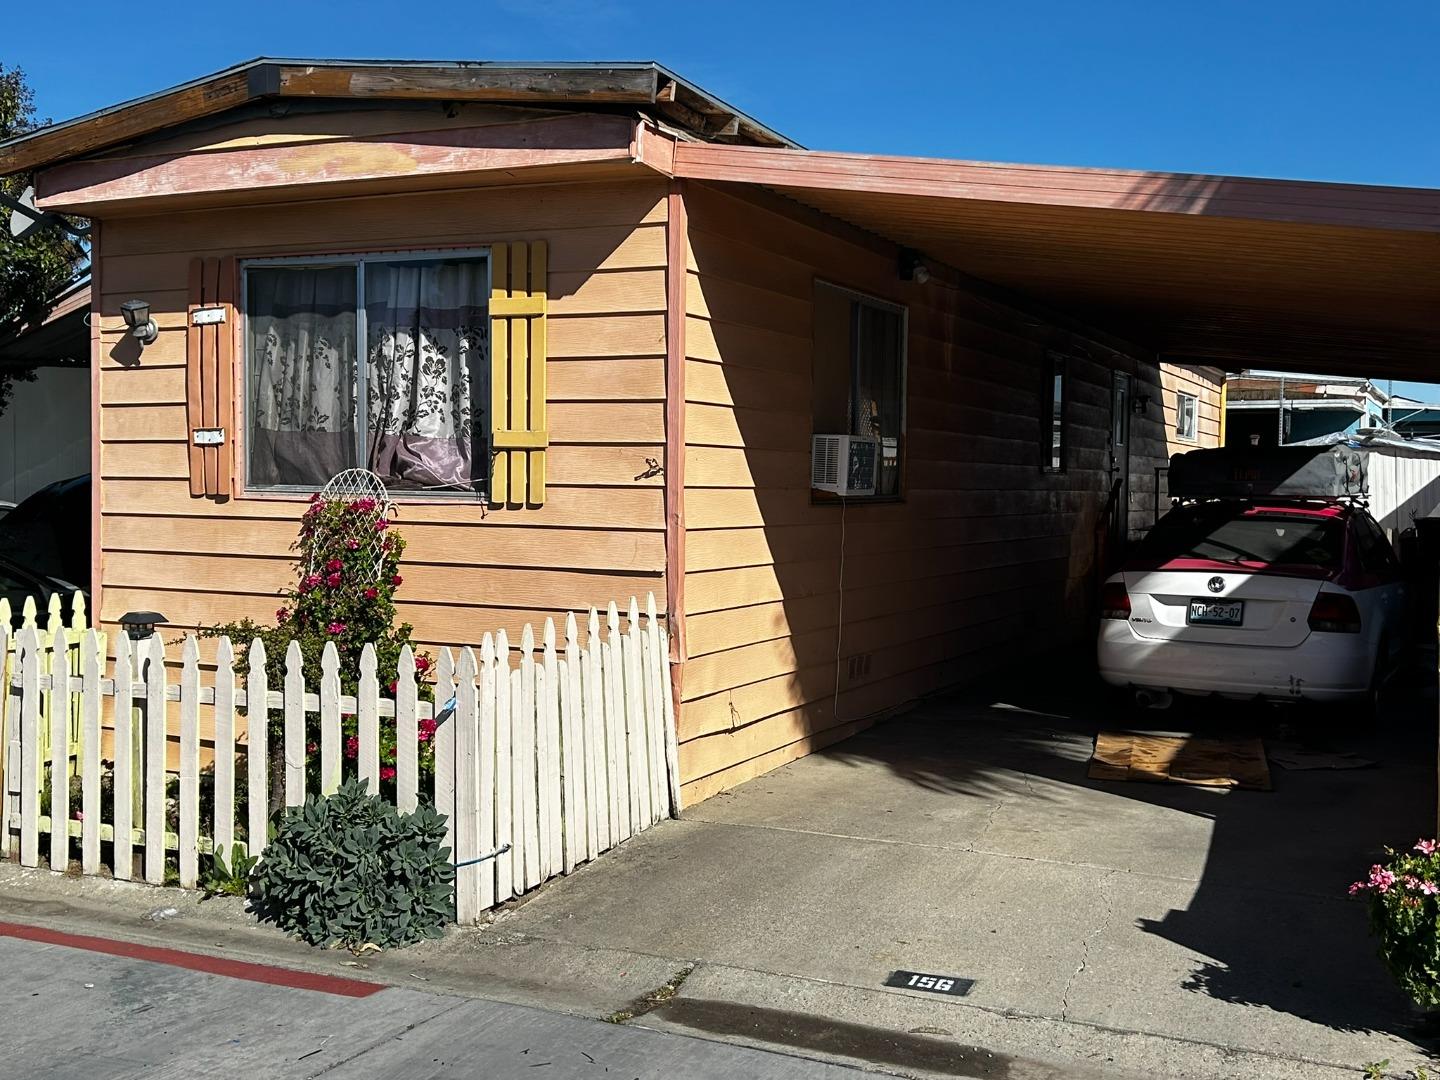 Photo of 156 Redwood Dr #156 in Hollister, CA